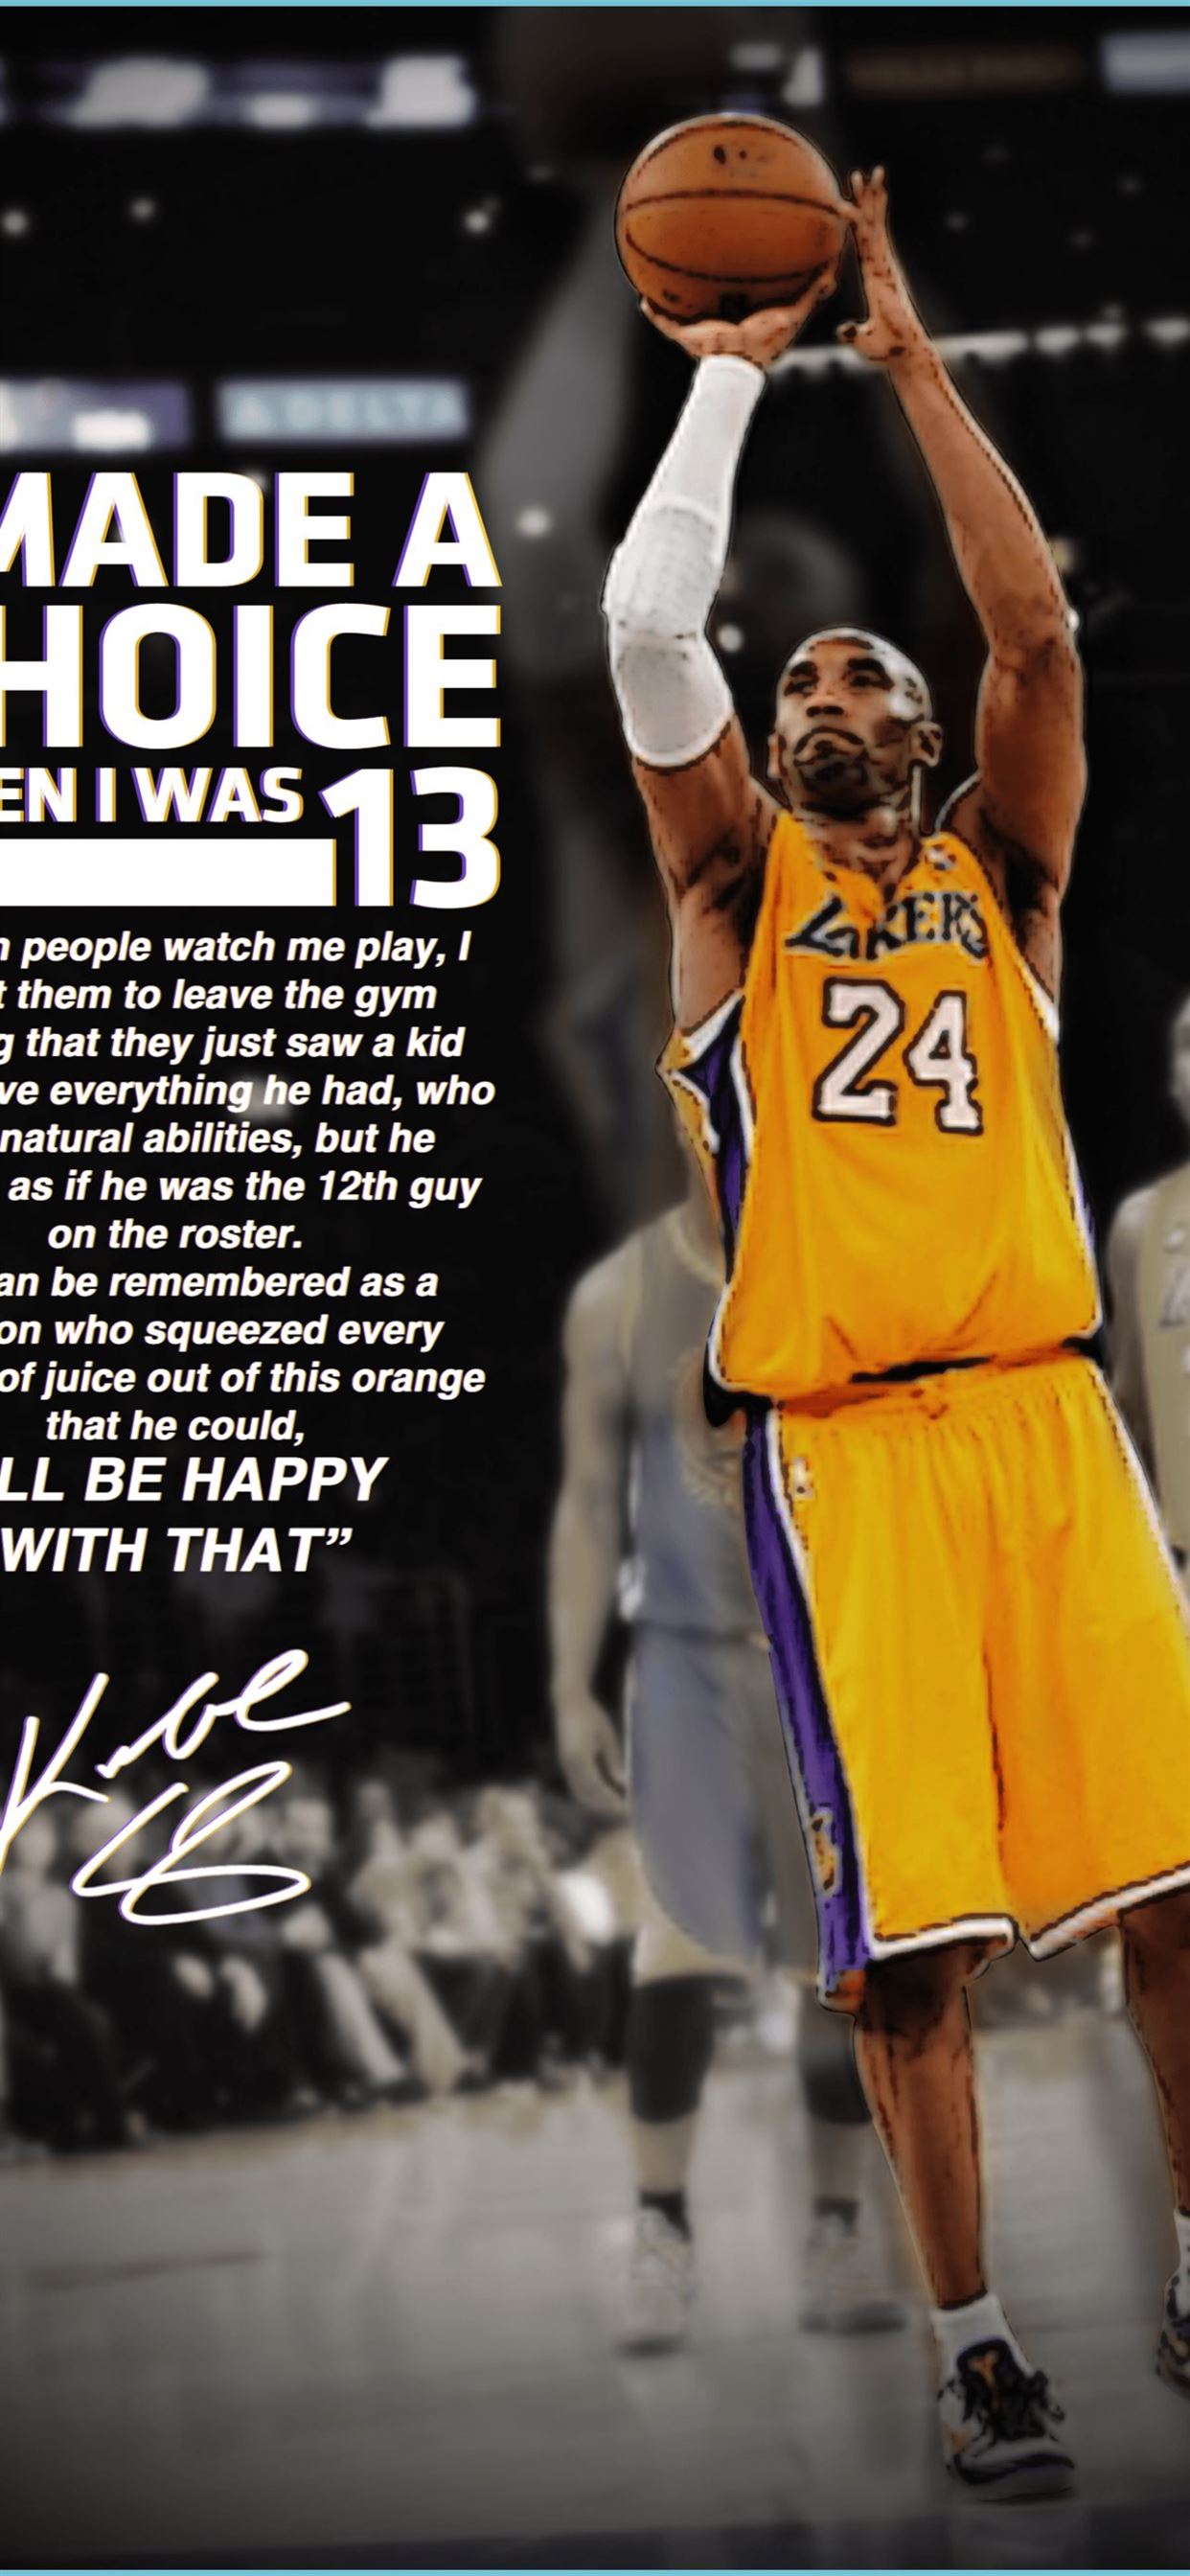 Cool kobe bryant anime wallpapers Poster basketball gift ideas for boy NBA   Best gifts your whole family